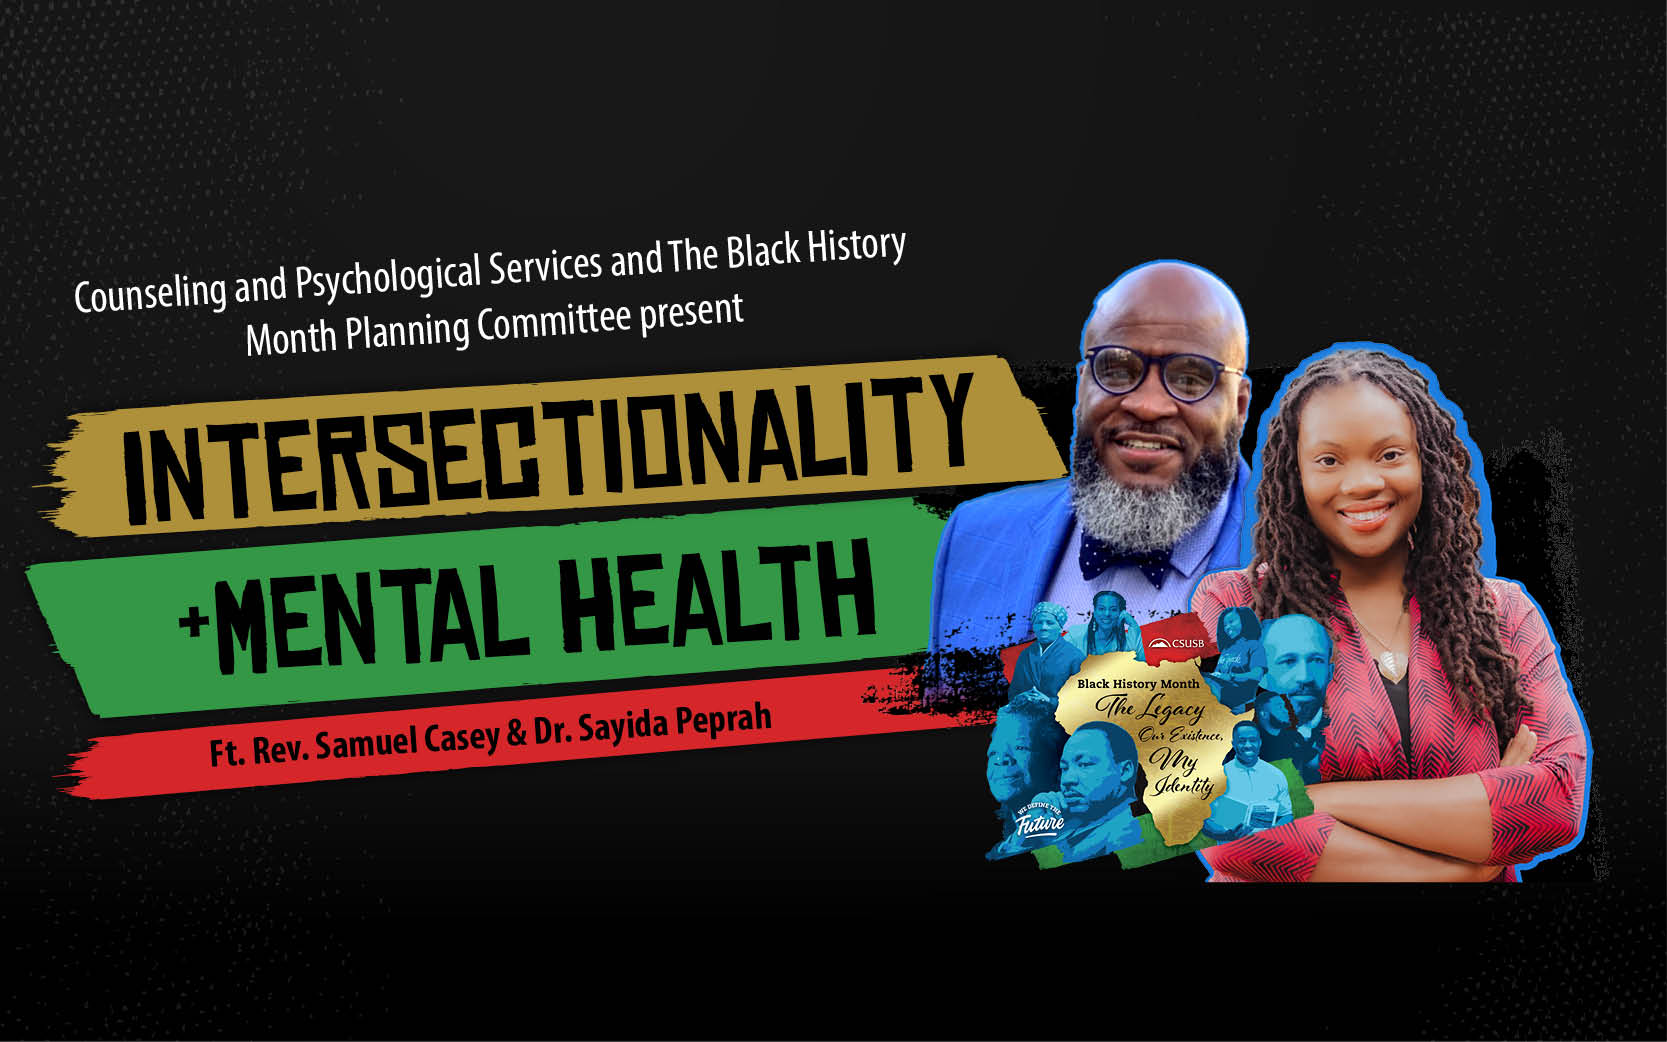 Black History Month: The Legacy, Our Existence, My Identity, Intersectionality & Mental Health